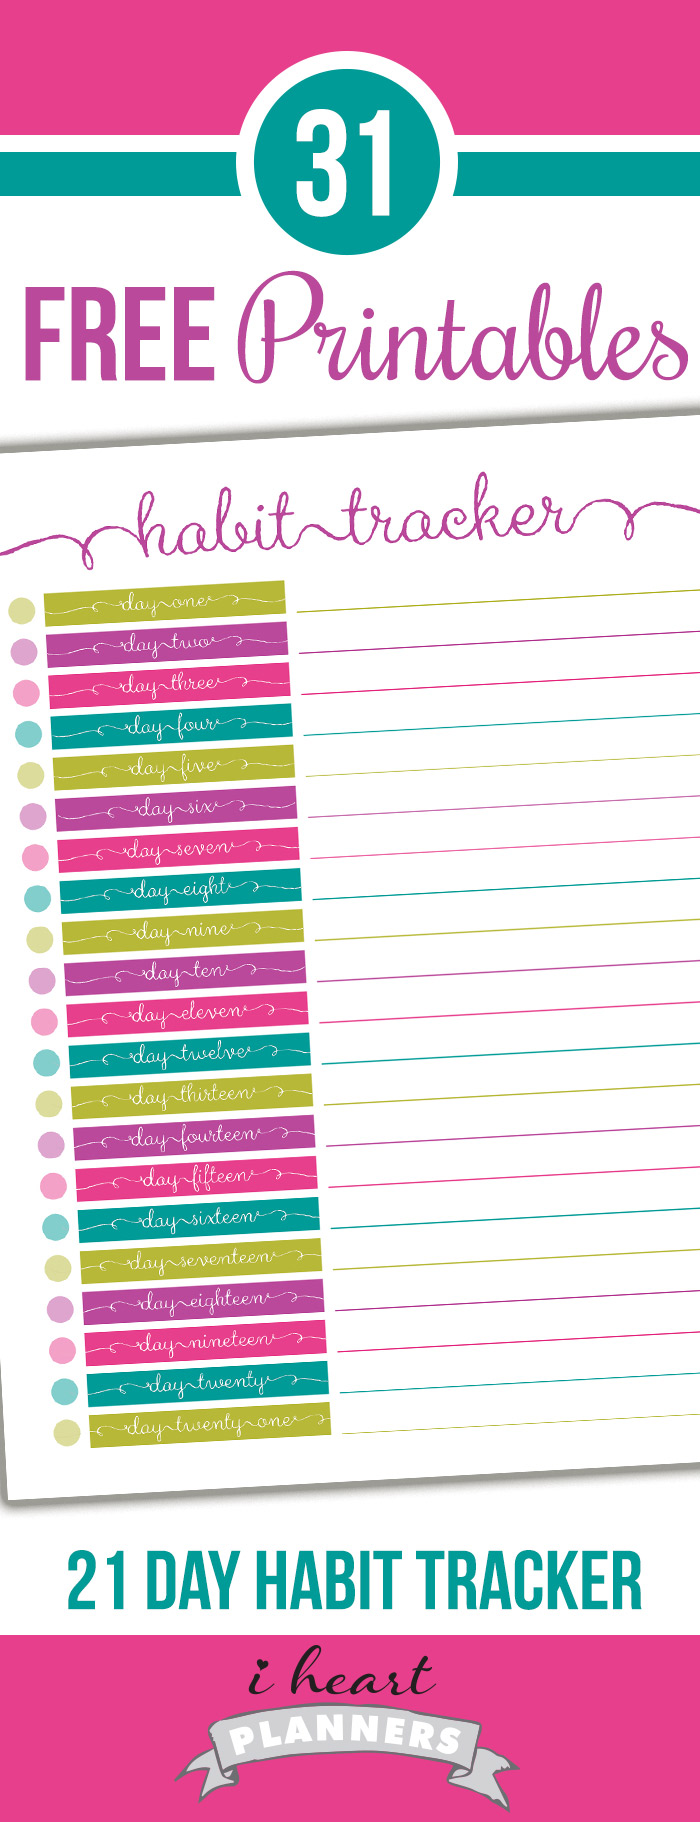 FREE 21 Day Habit Tracker printable! You can use this to track any habit like exercise, eating well, drinking water, cleaning, etc.